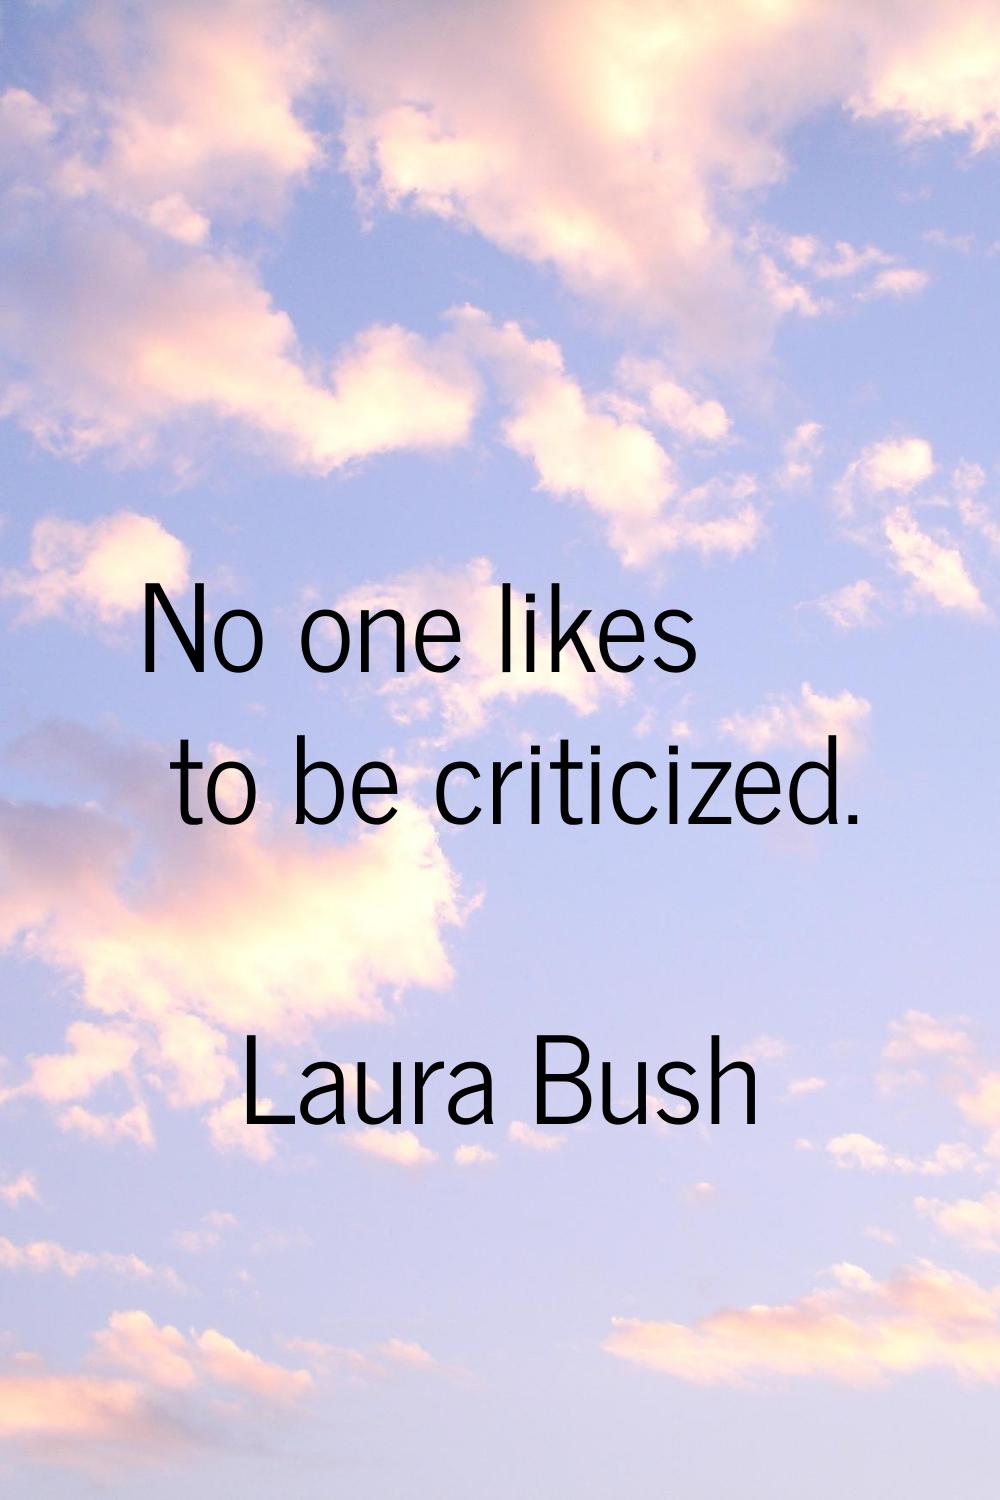 No one likes to be criticized.